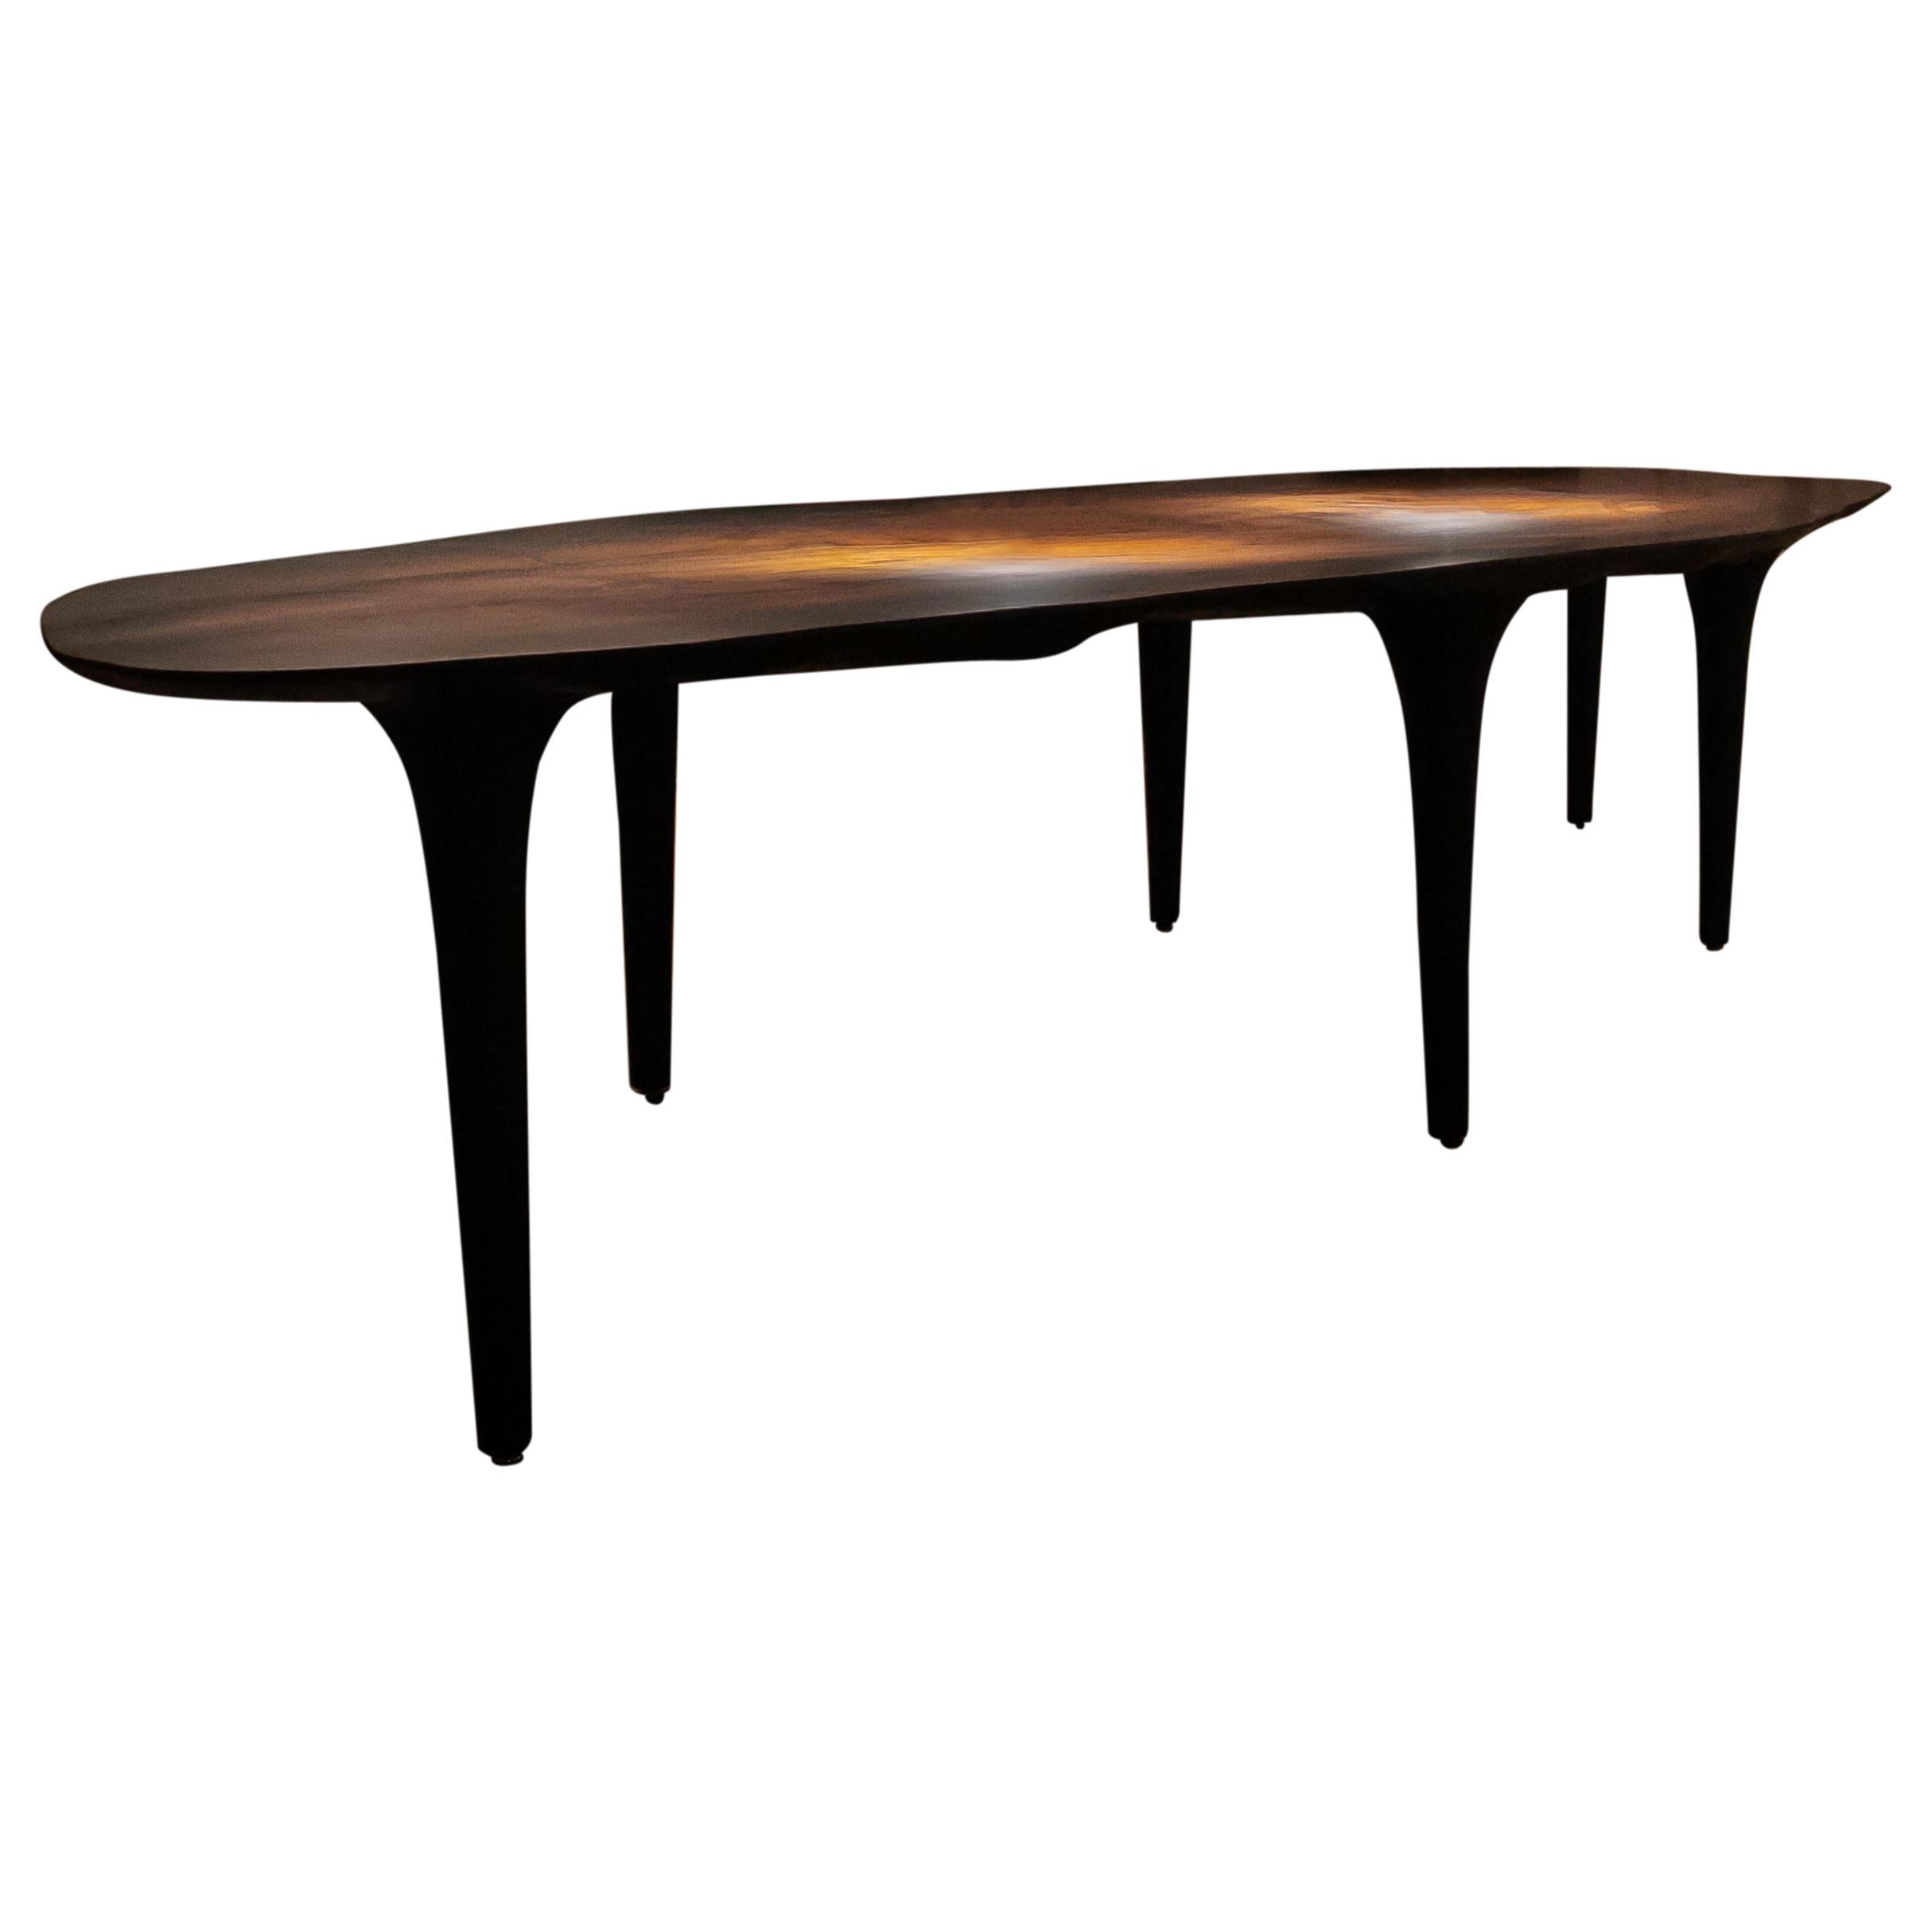 Unique "Scale" Monumental Dining Table Signed by Cedric Breisacher